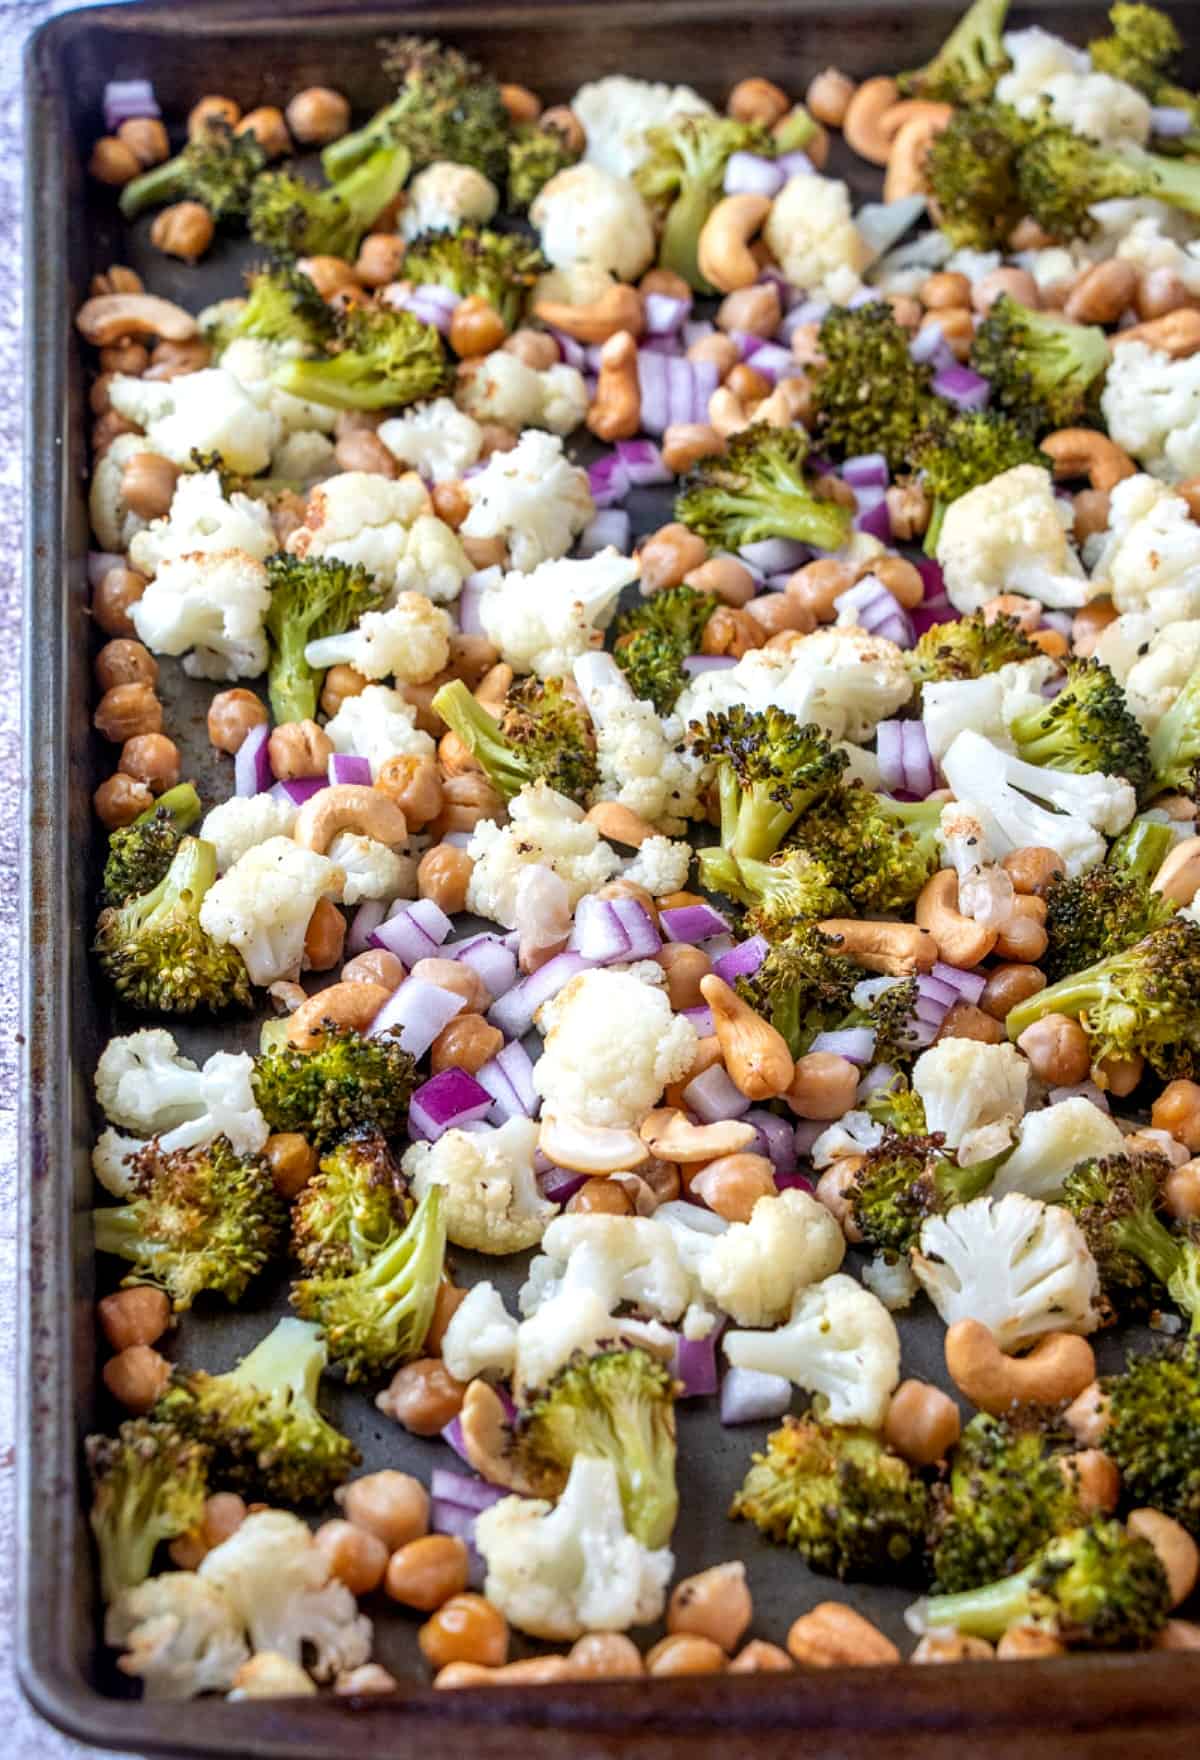 Mixed vegetable bites with cashews are roasted and on a baking sheet.